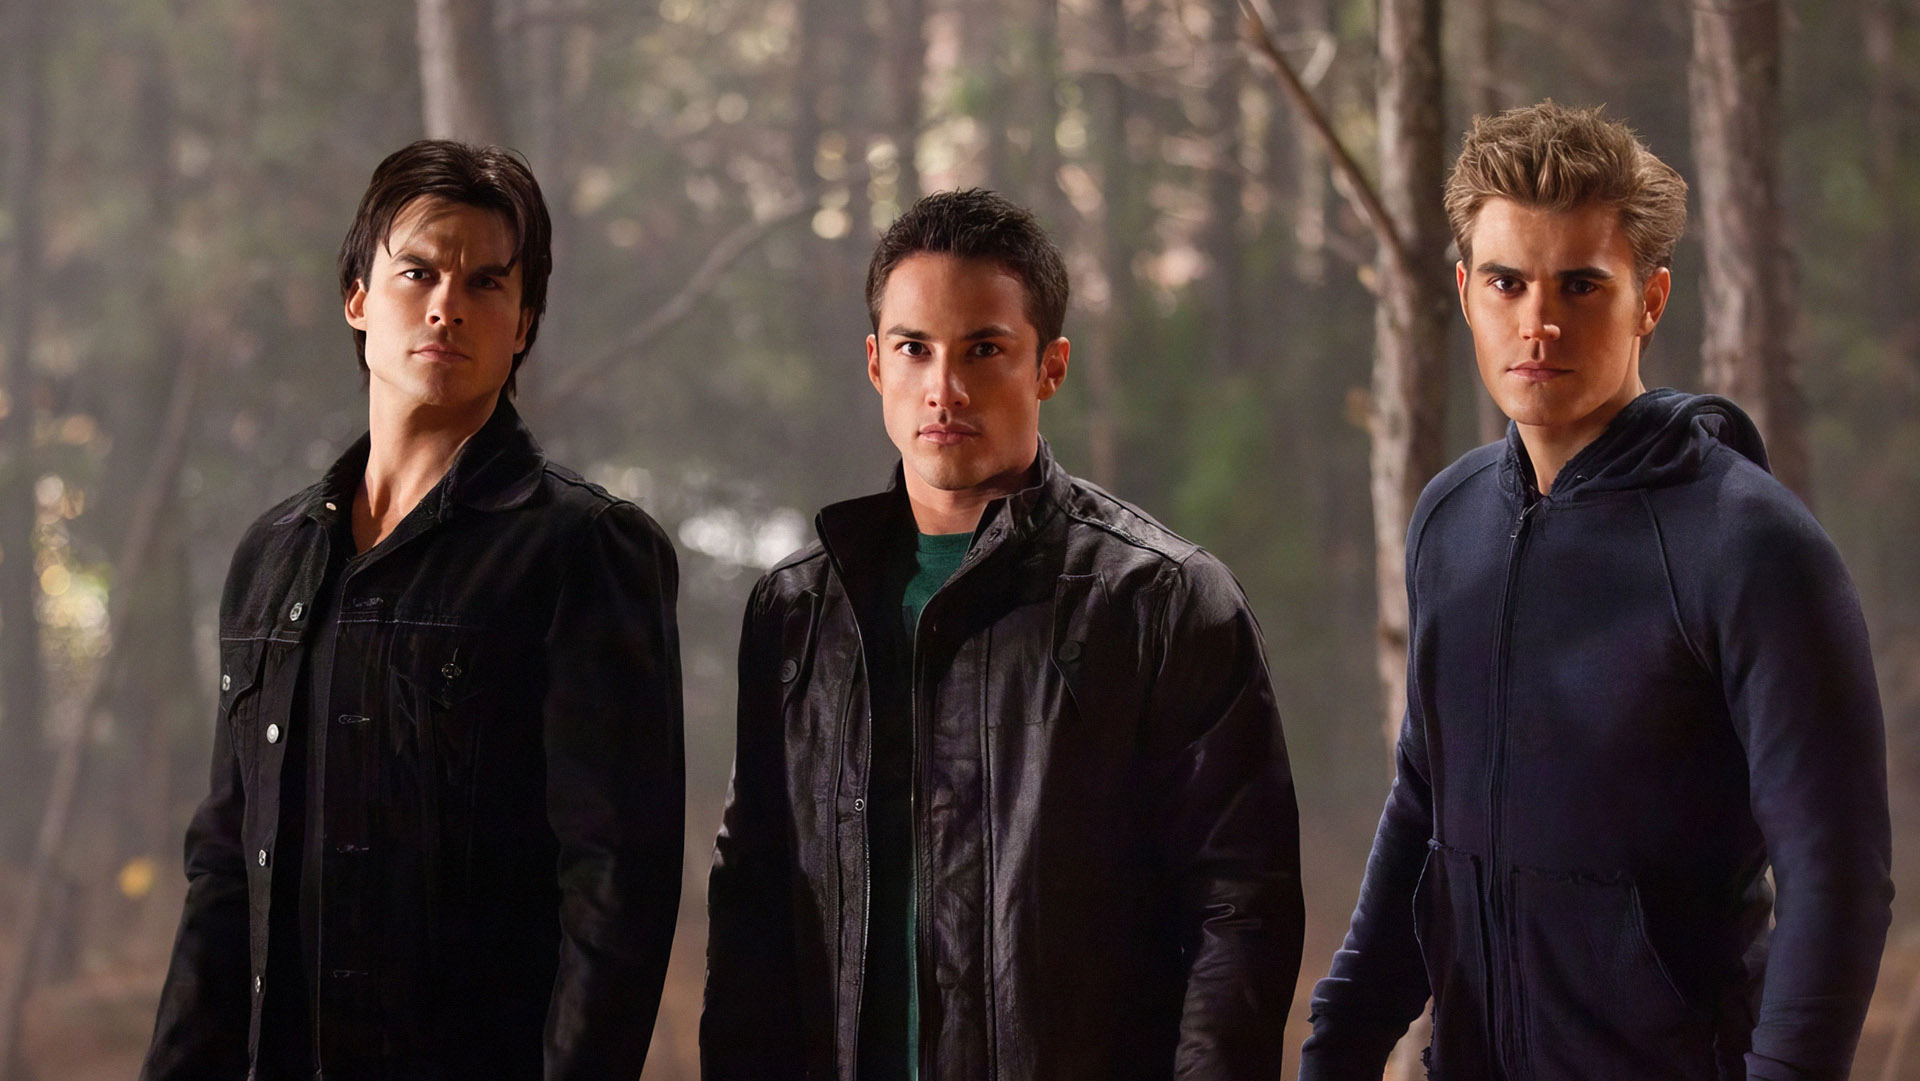 5 Underrated Duos in The Vampire Diaries That Deserved More Screen Time